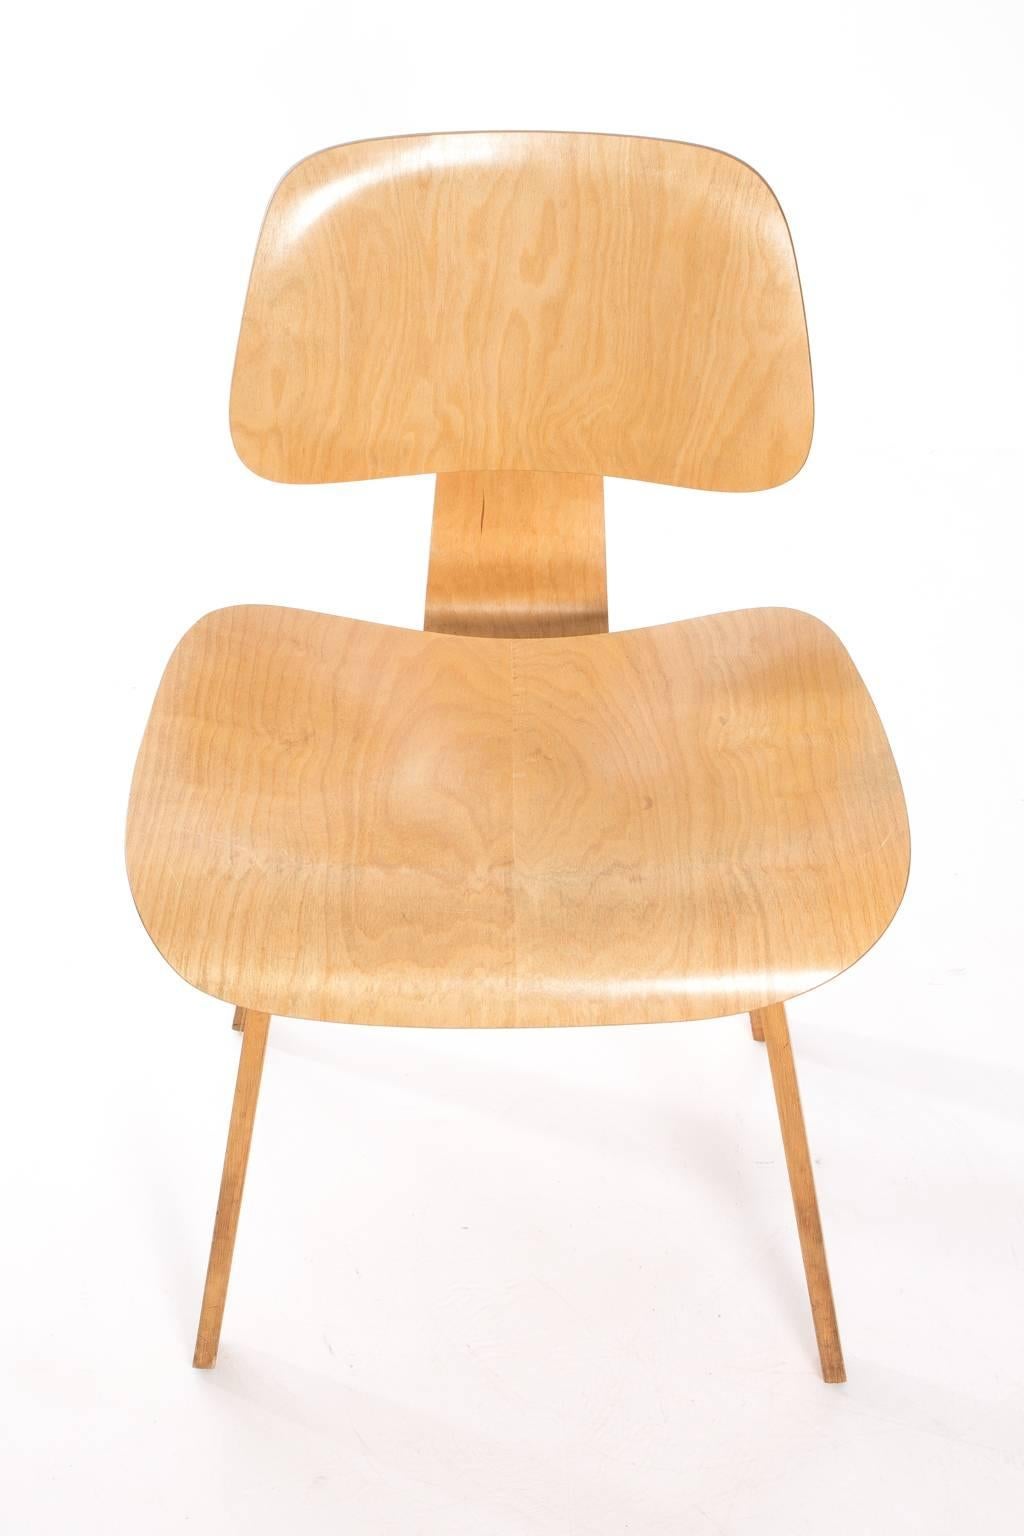 20th Century LCW Chair For Sale